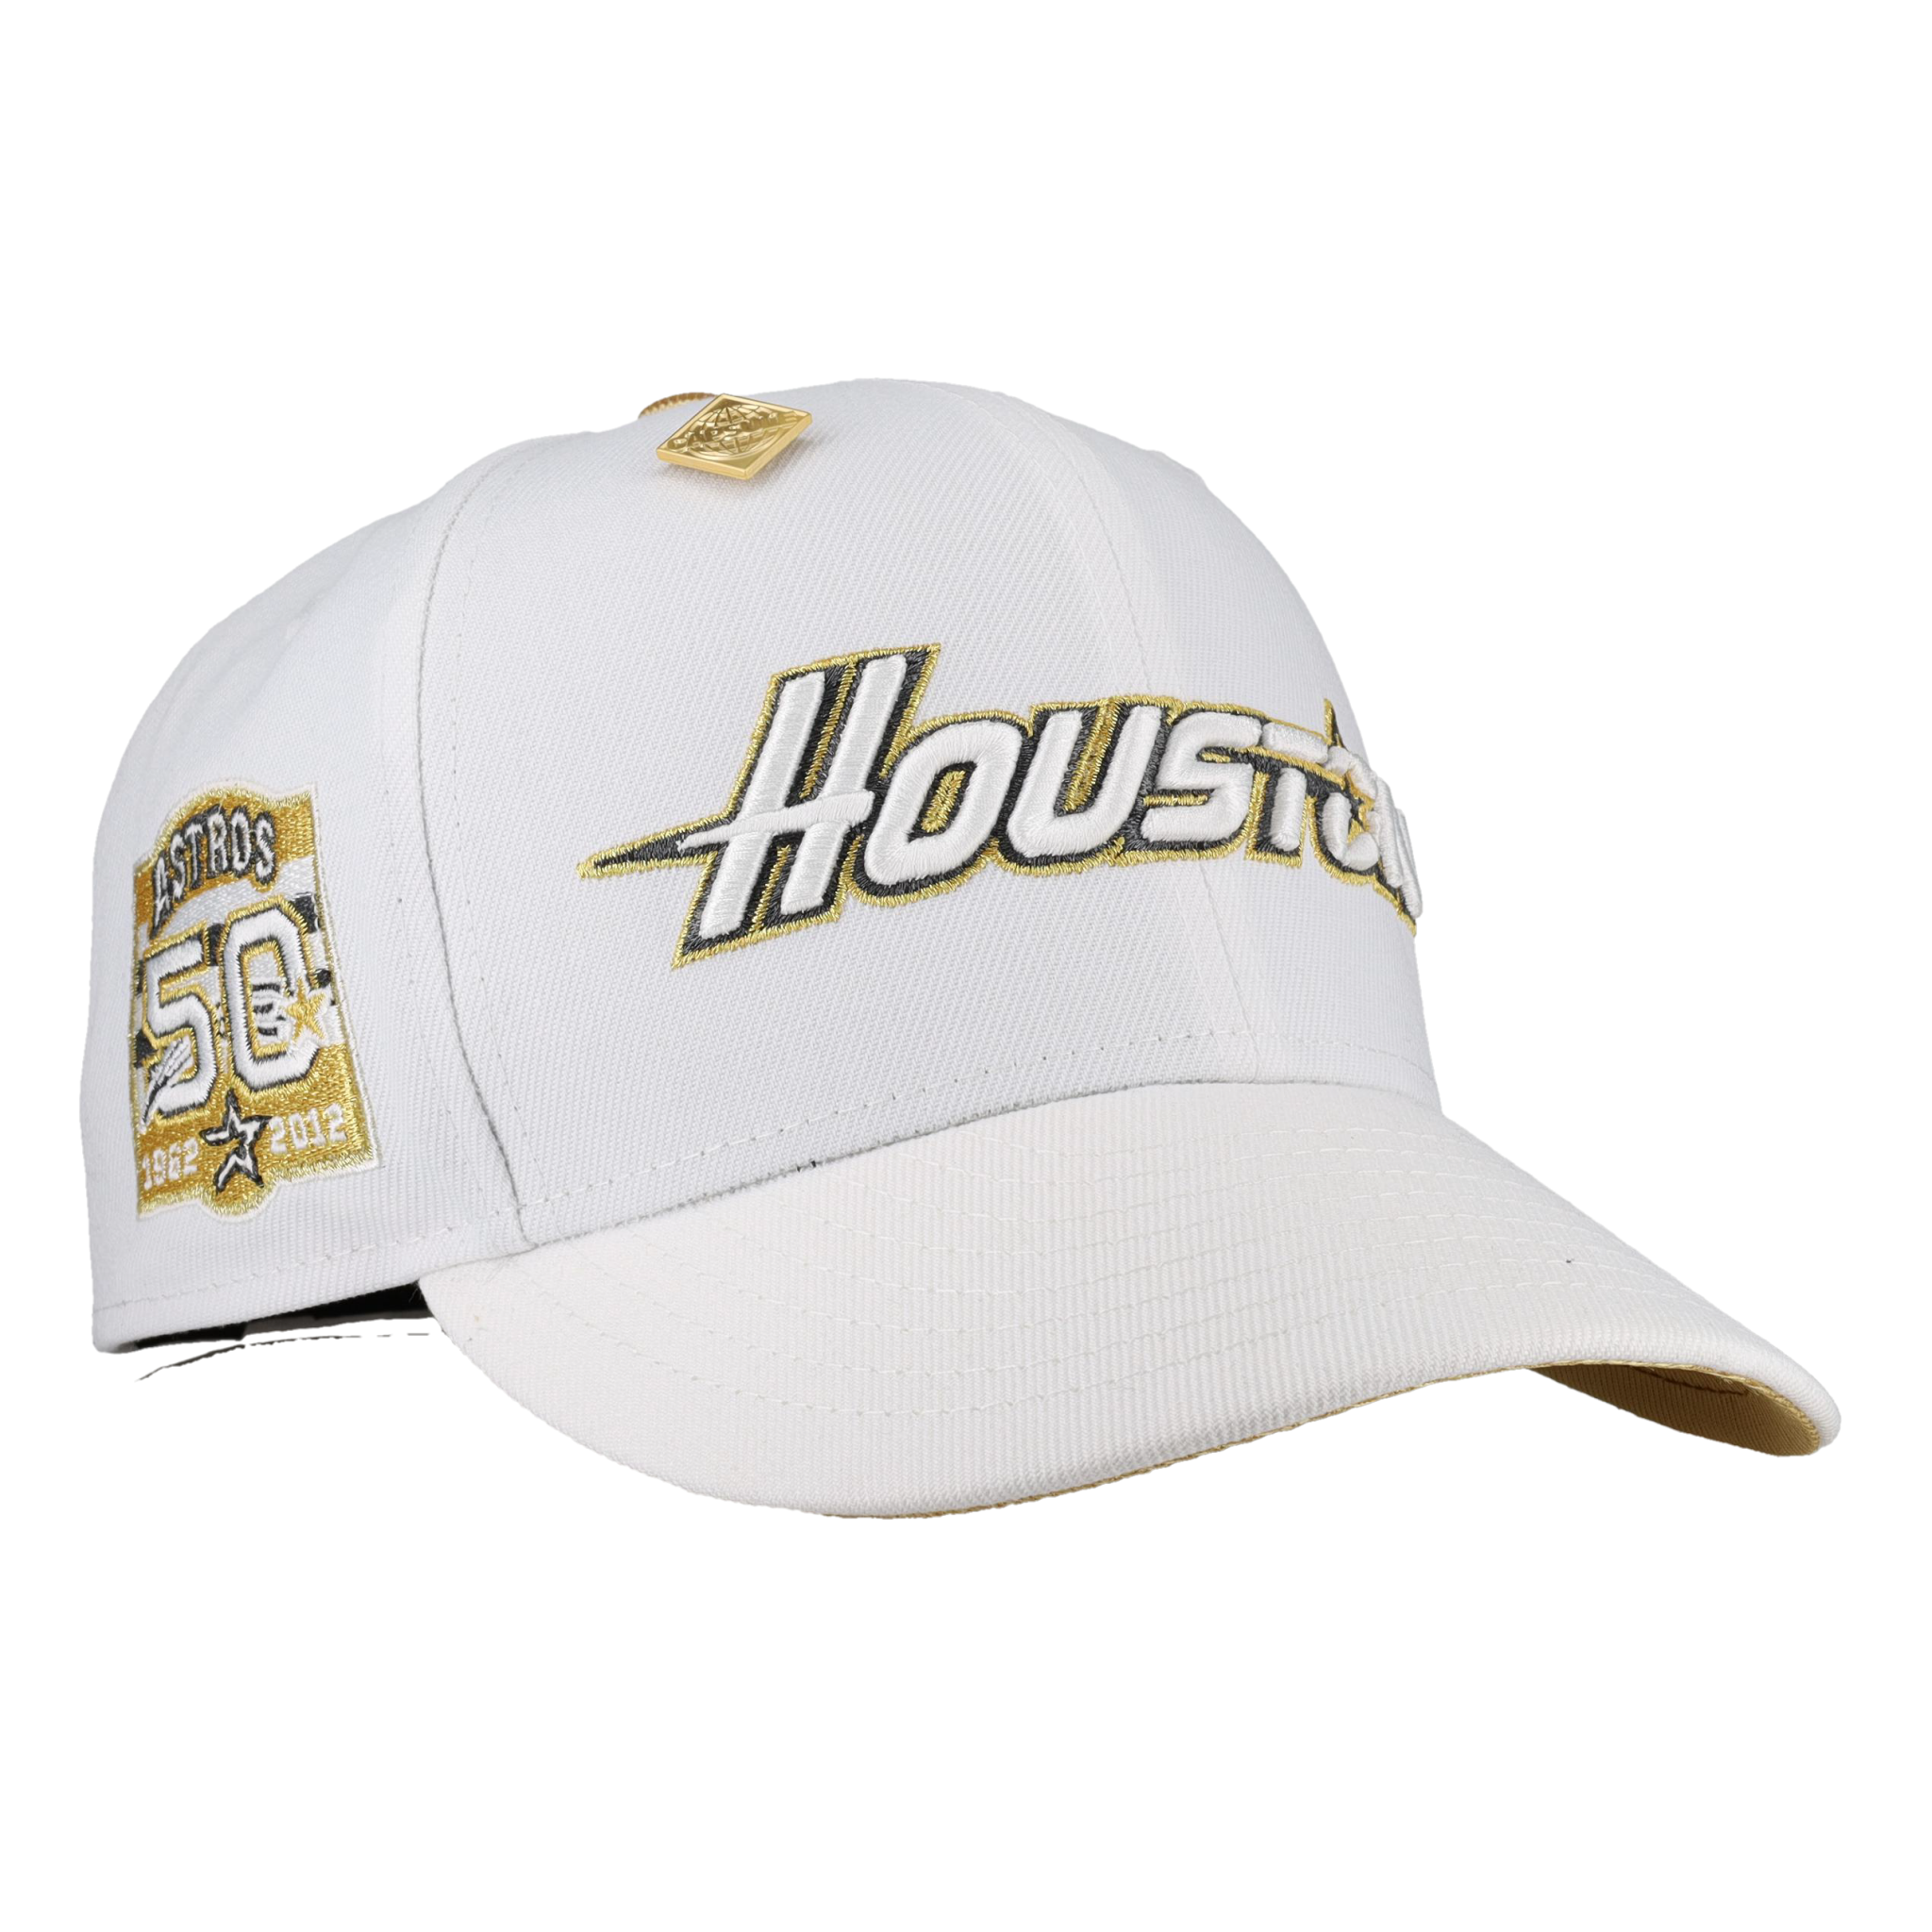 white astros fsPNG.png__PID:2e8f4ad2-9dc7-40ff-8714-22e9a0991403